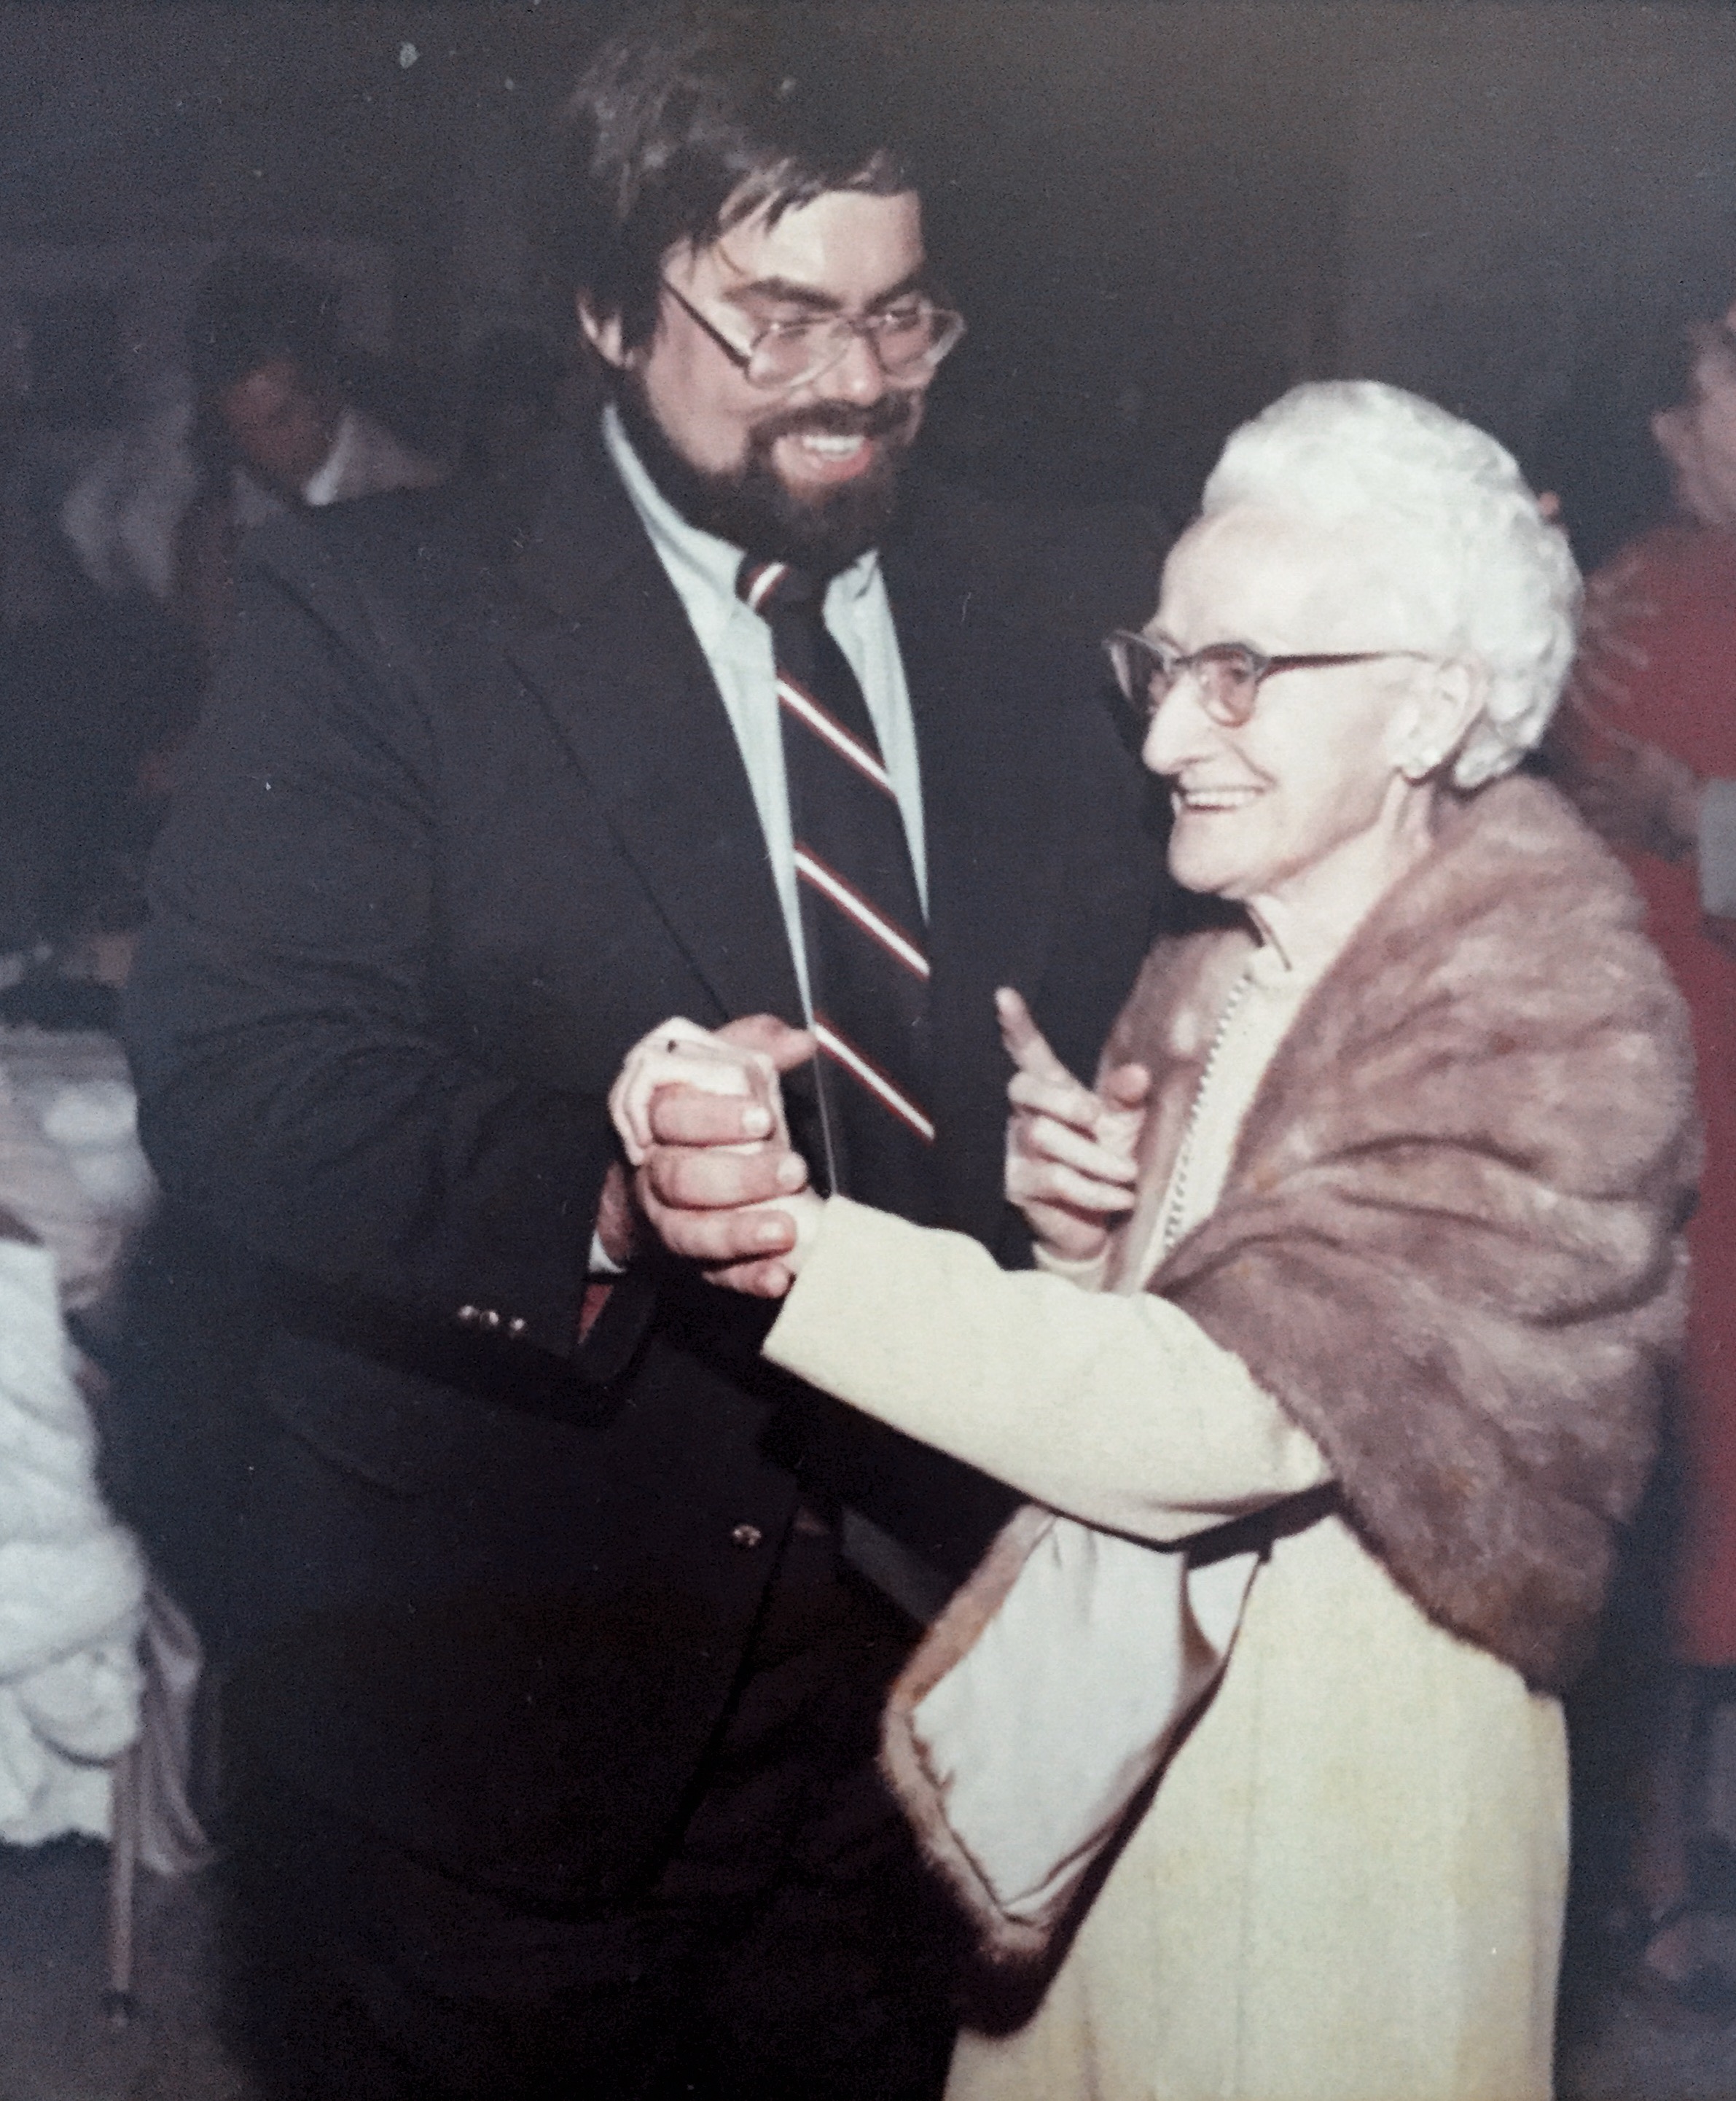 Brother Michael and Granny Ripken at my first wedding reception in 1978.